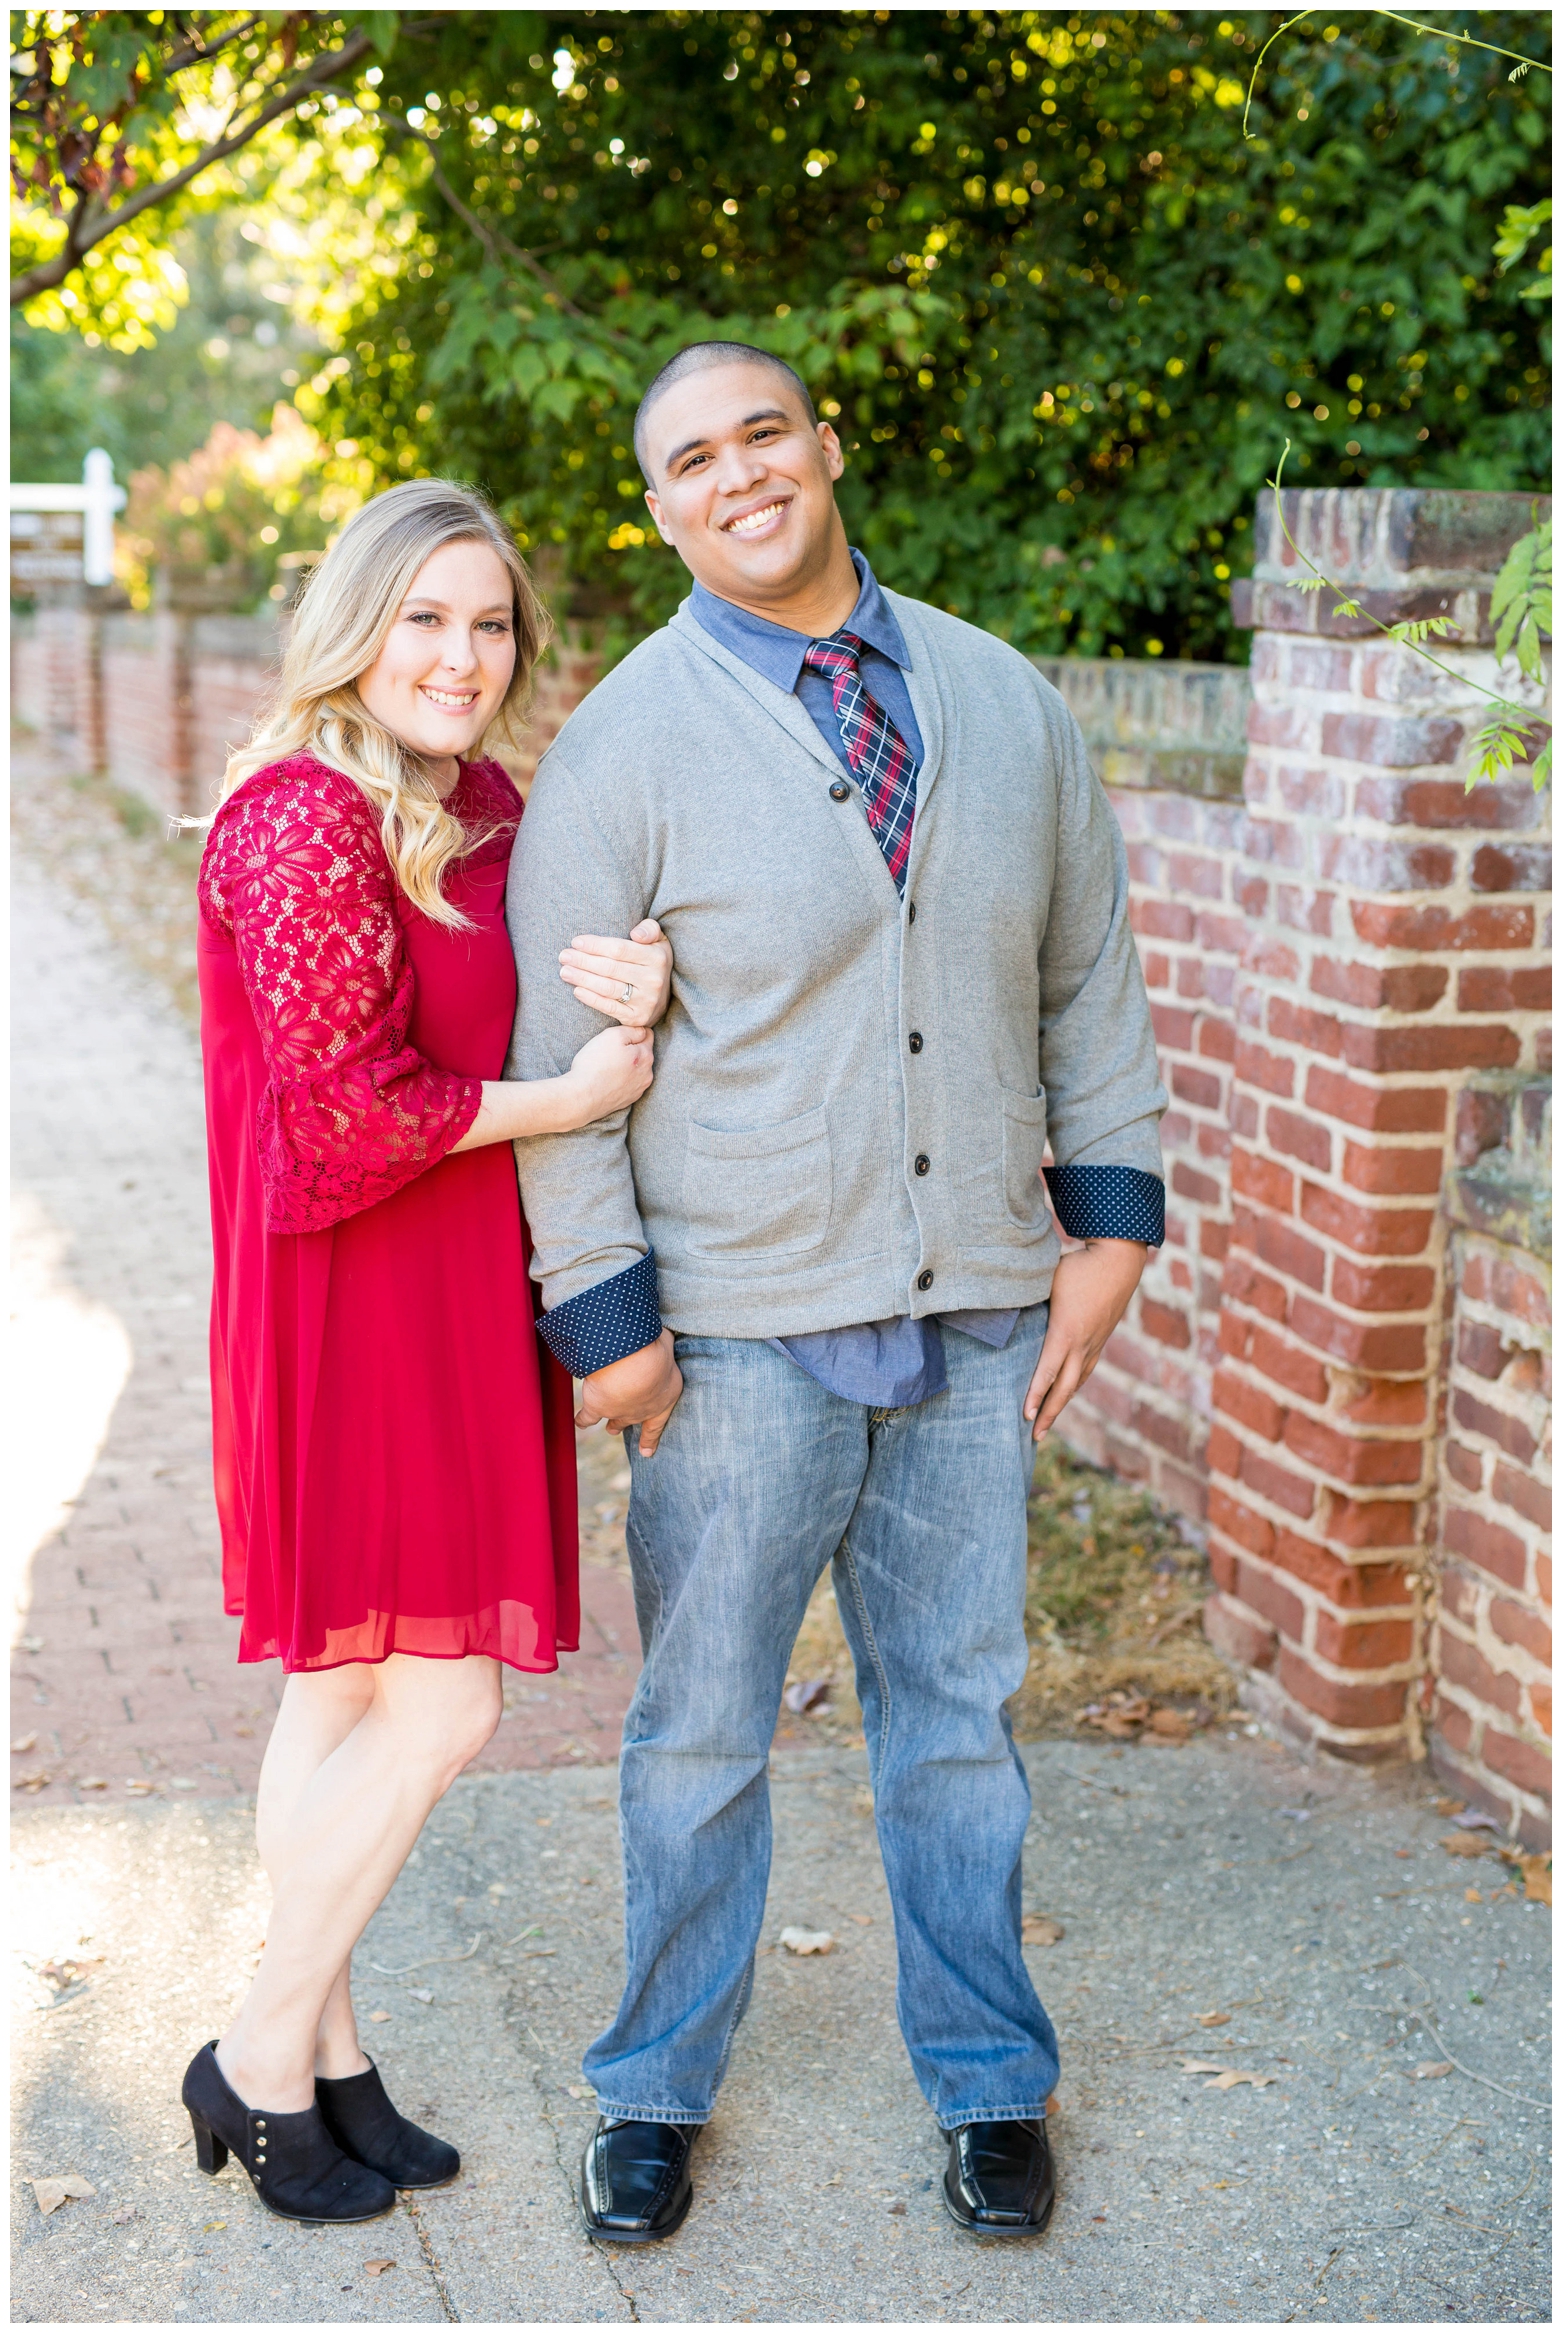 View More: http://hopetaylorphotographyphotos.pass.us/danny-and-kristin